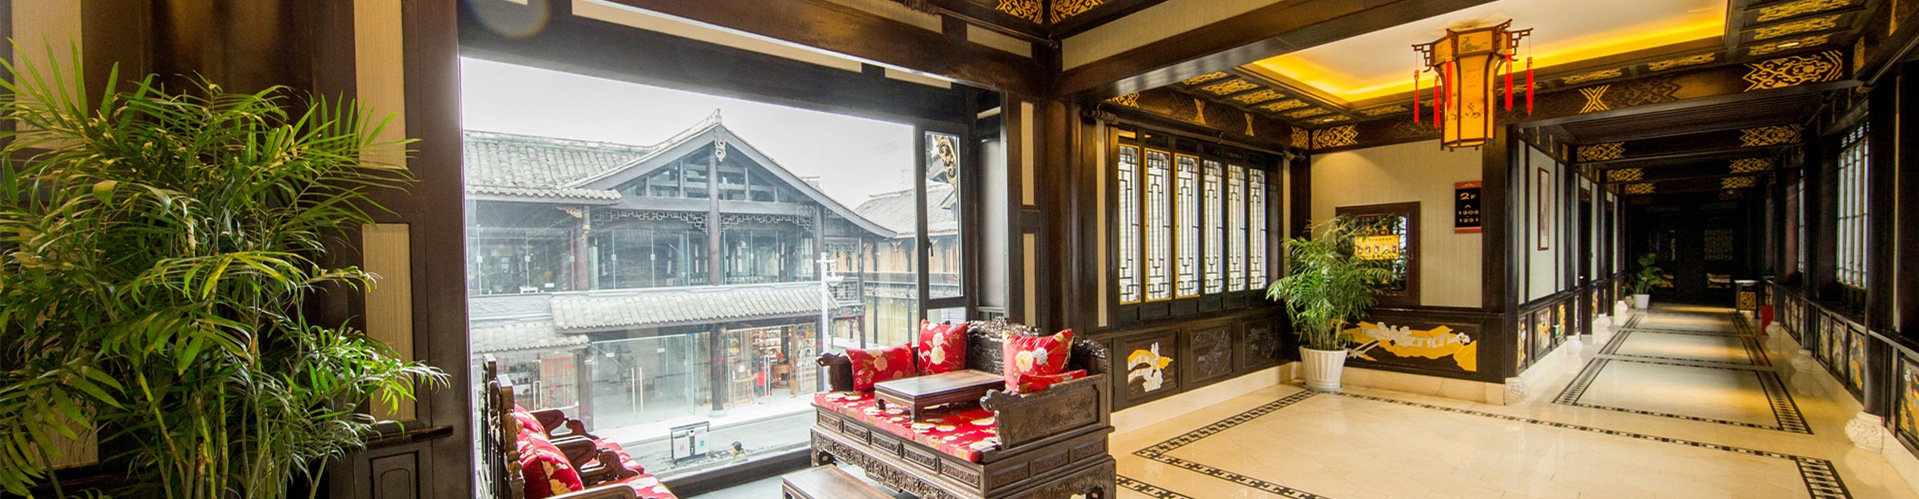 Where to Stay in Chengdu - Make Your Trip Easy With This Travel Guide